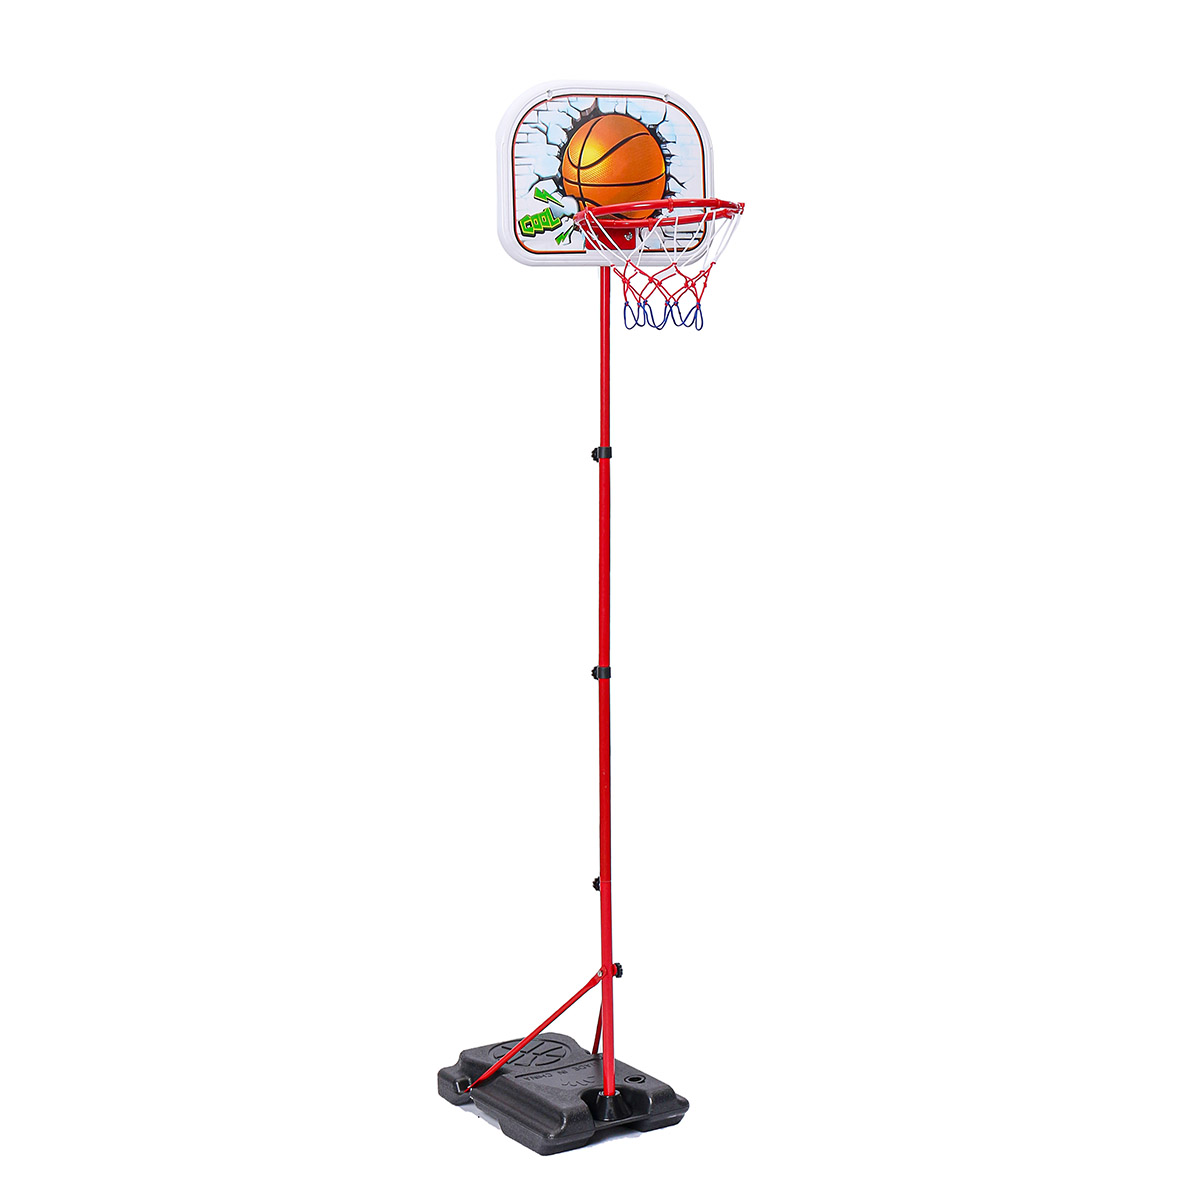 Liftable-Tire-Iron-Frame-Basketball-Stand-Childrens-Outdoor-Indoor-Sports-Shooting-Frame-Toys-1636599-2